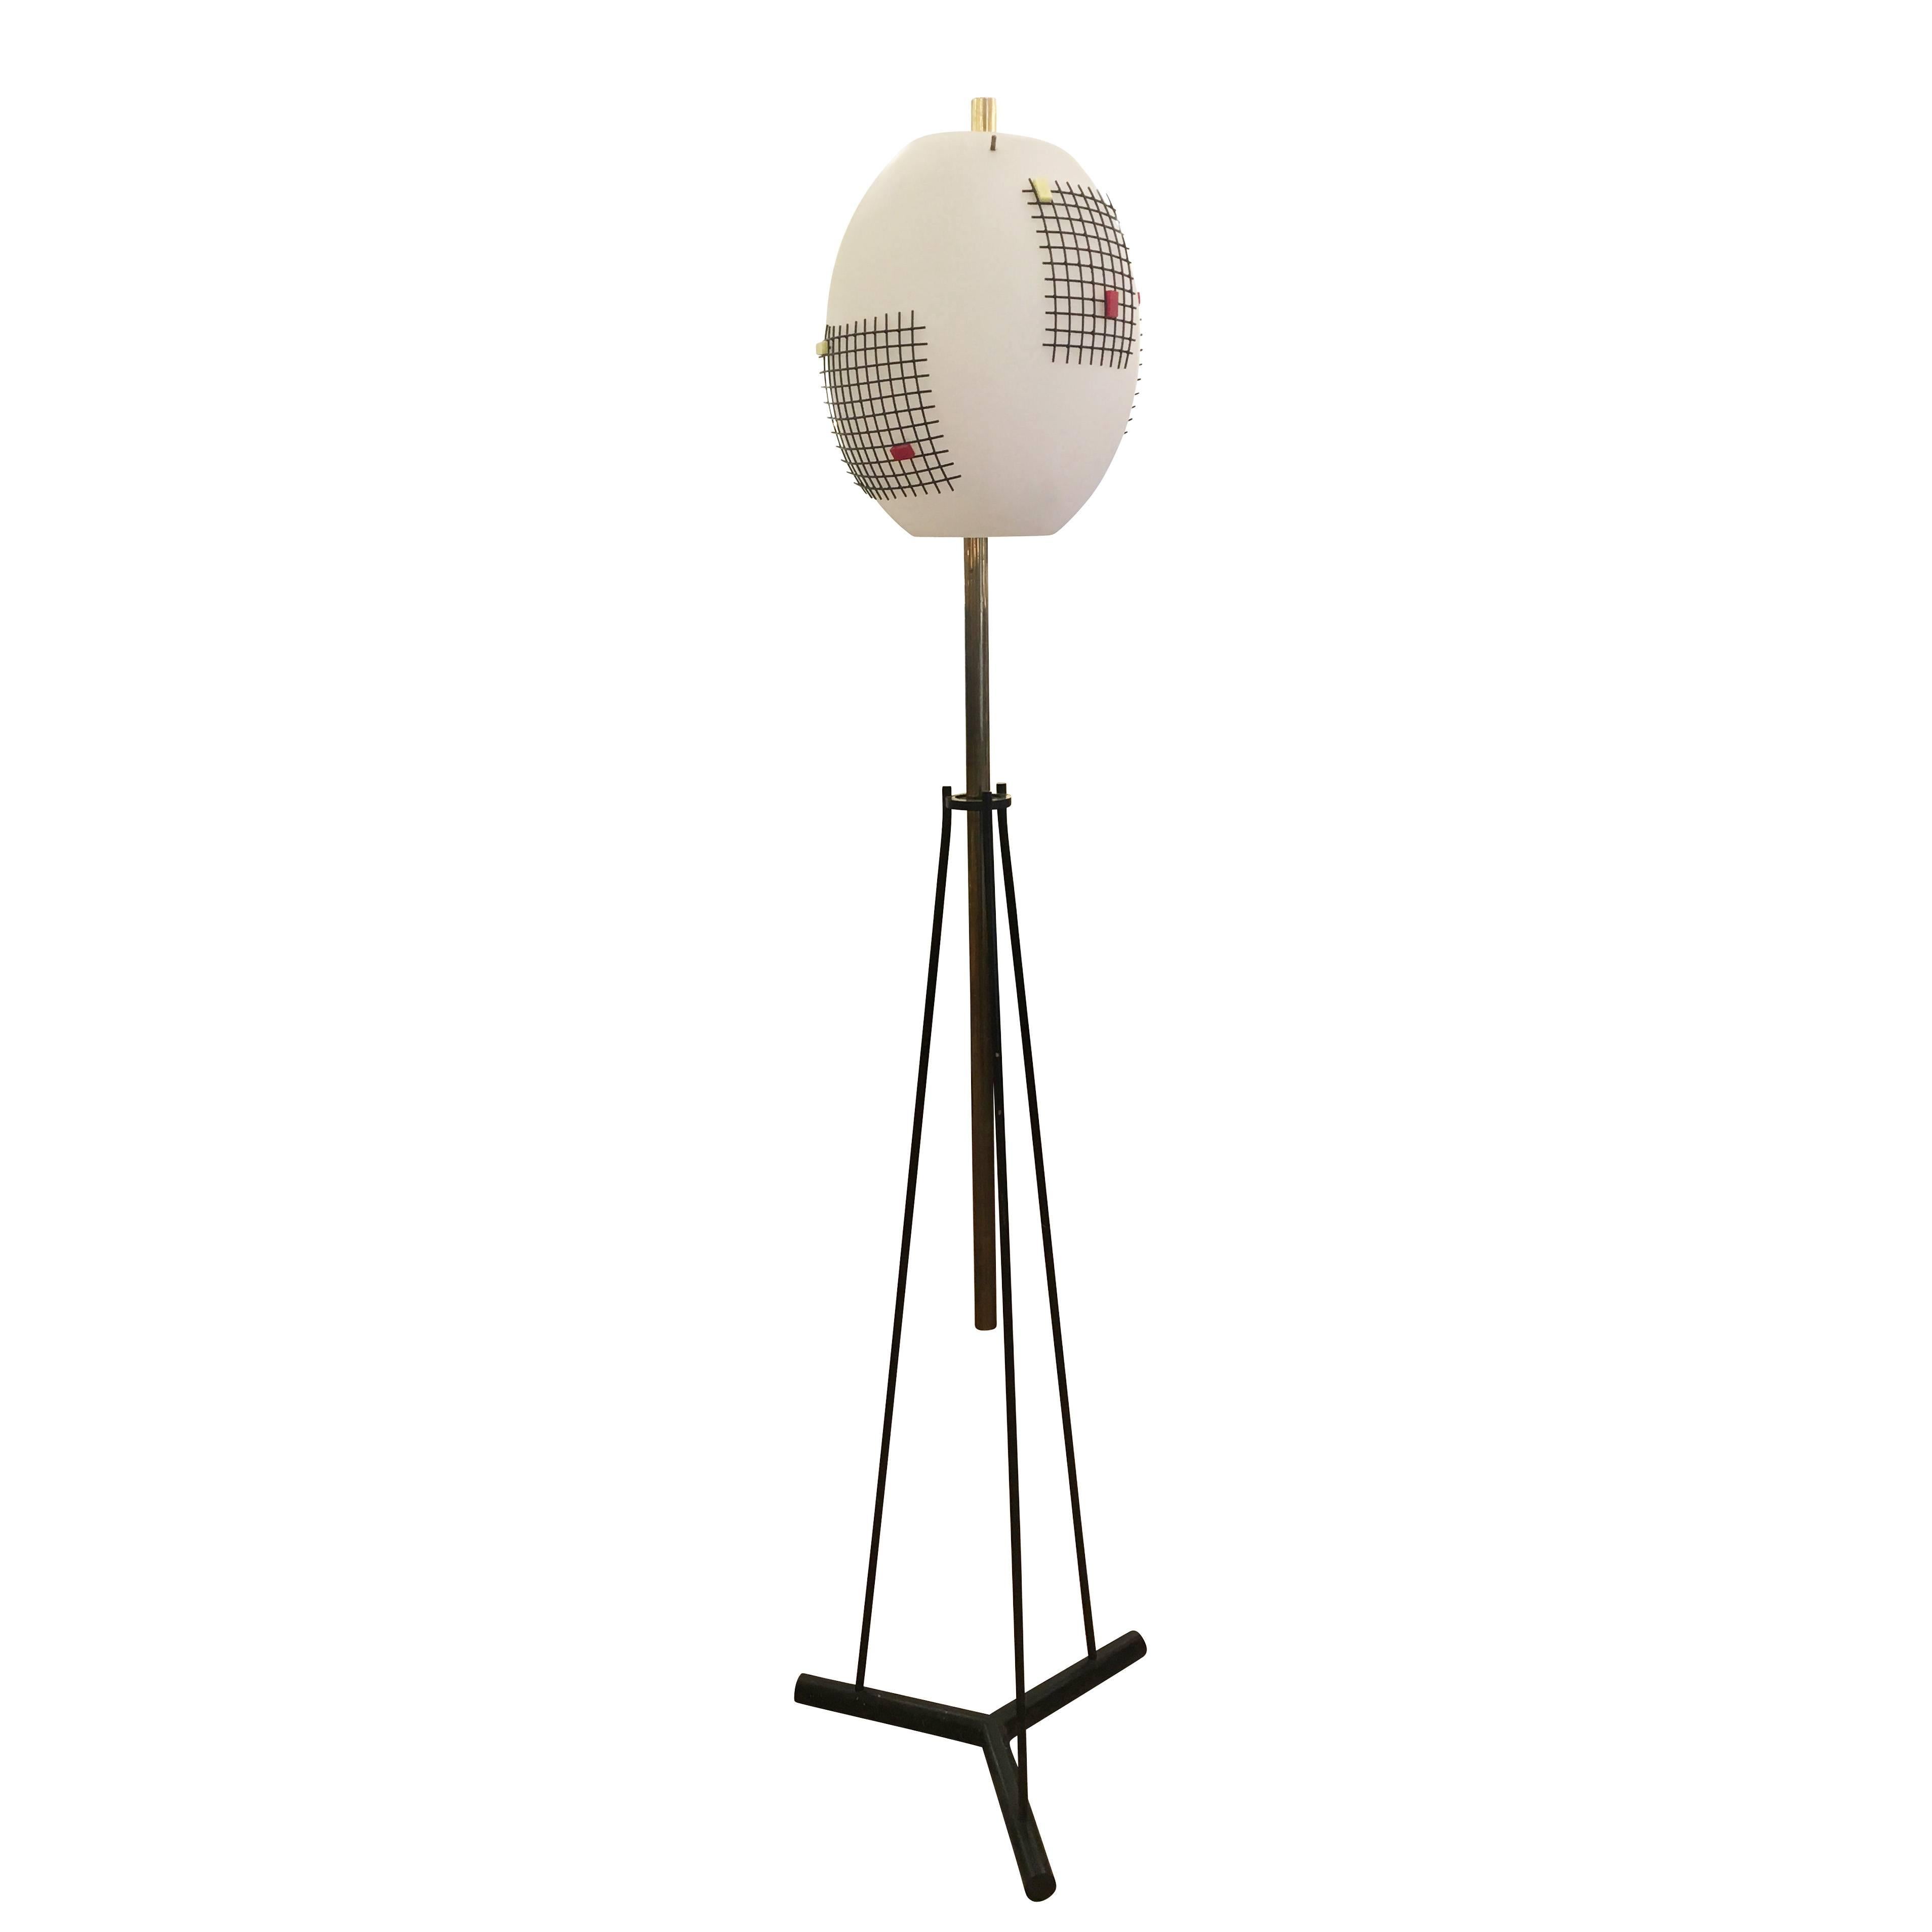 Rare floor lamp designed by Angelo Lelli for Arredoluce in the 1960s. Features a large oval glass shade on a tripod base. The shade is decorated with four black metal grids which are held in place by red and yellow perspex cubes. The base is